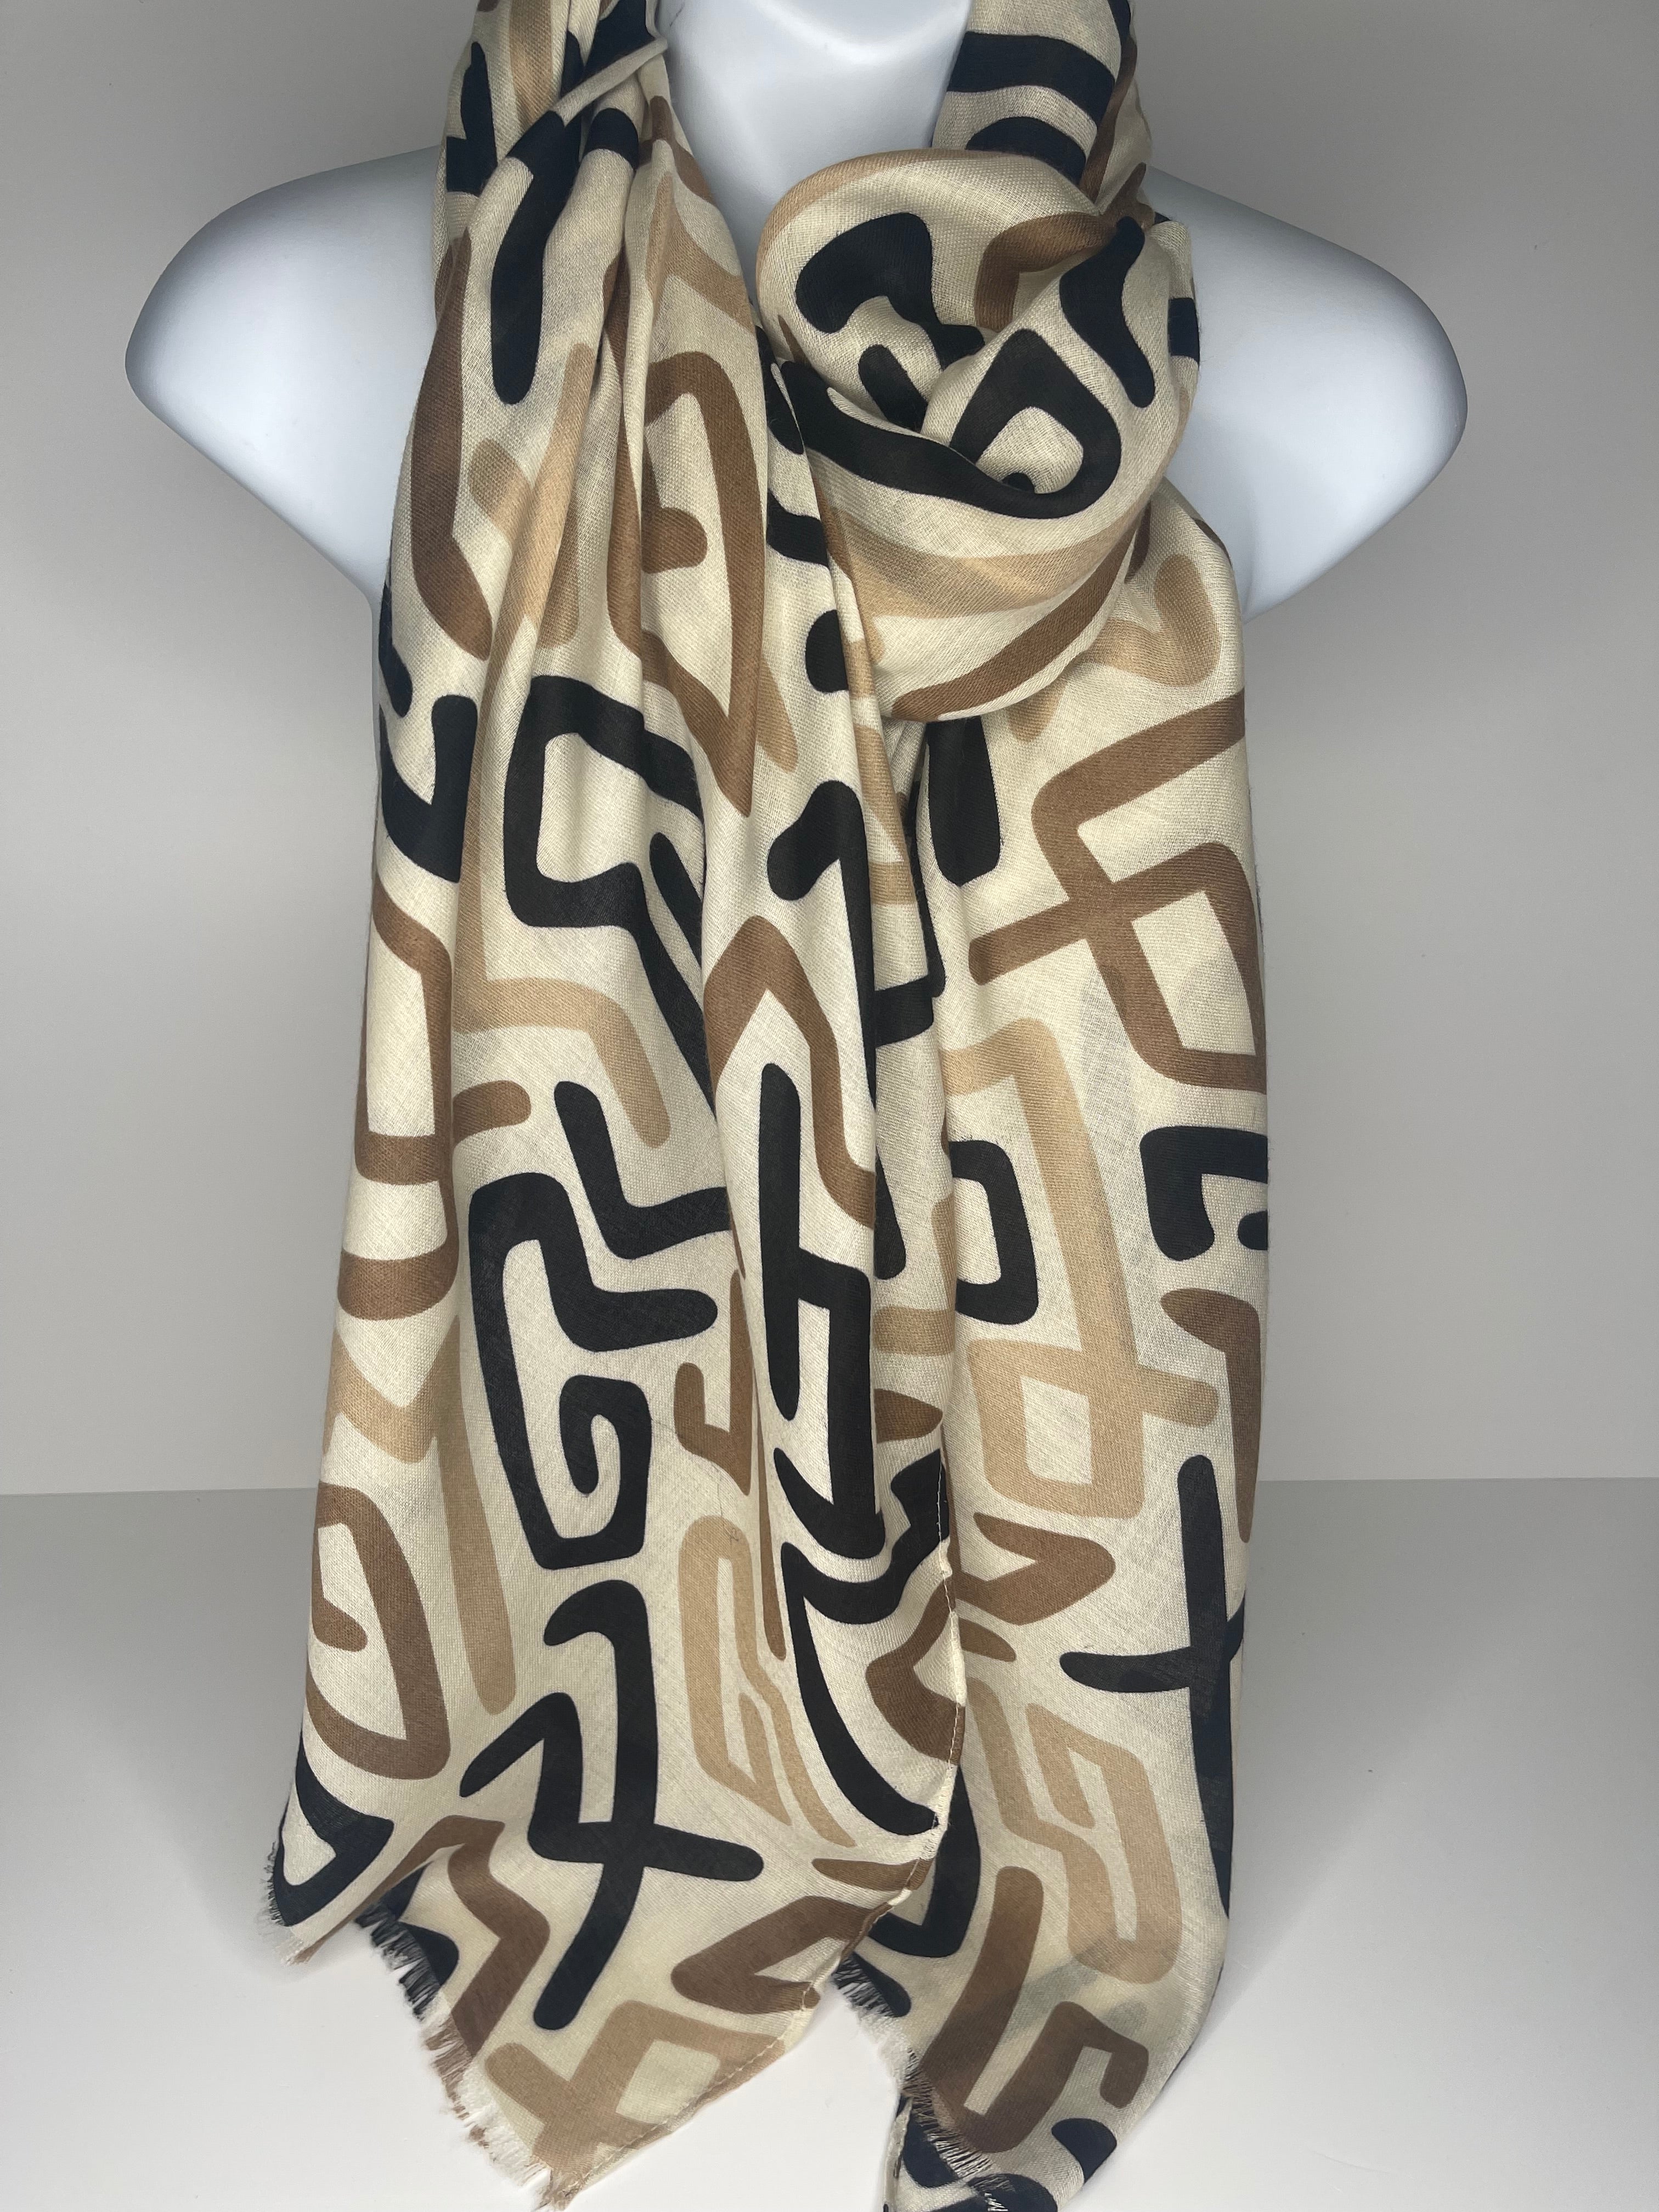 Lighter weight abstract print scarf in shades of cream, black, beige and brown